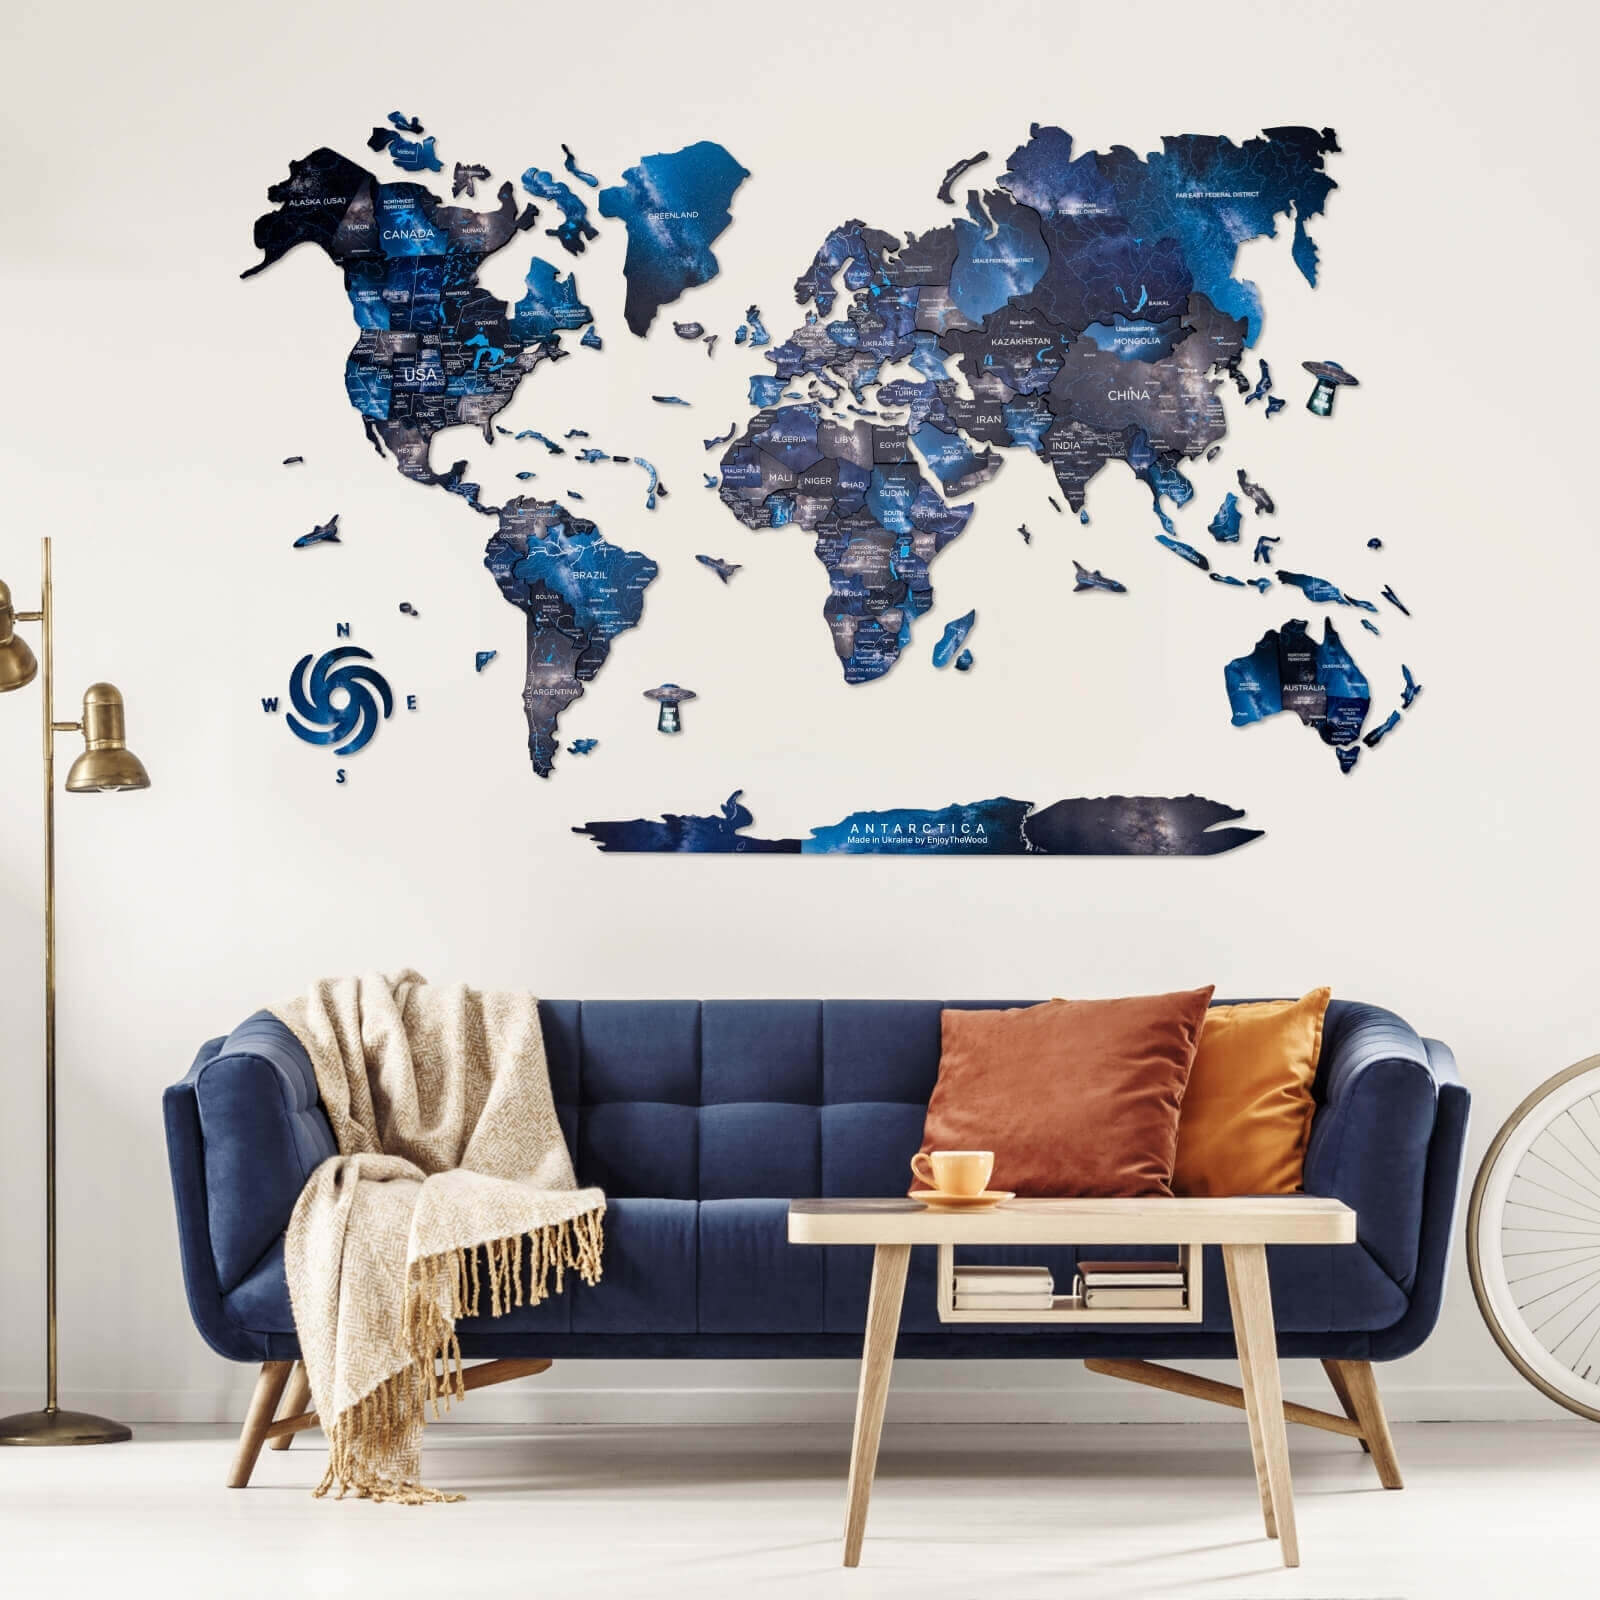 3D Wooden World Map Space from Enjoy The Wood ‣ Good Price, Reviews